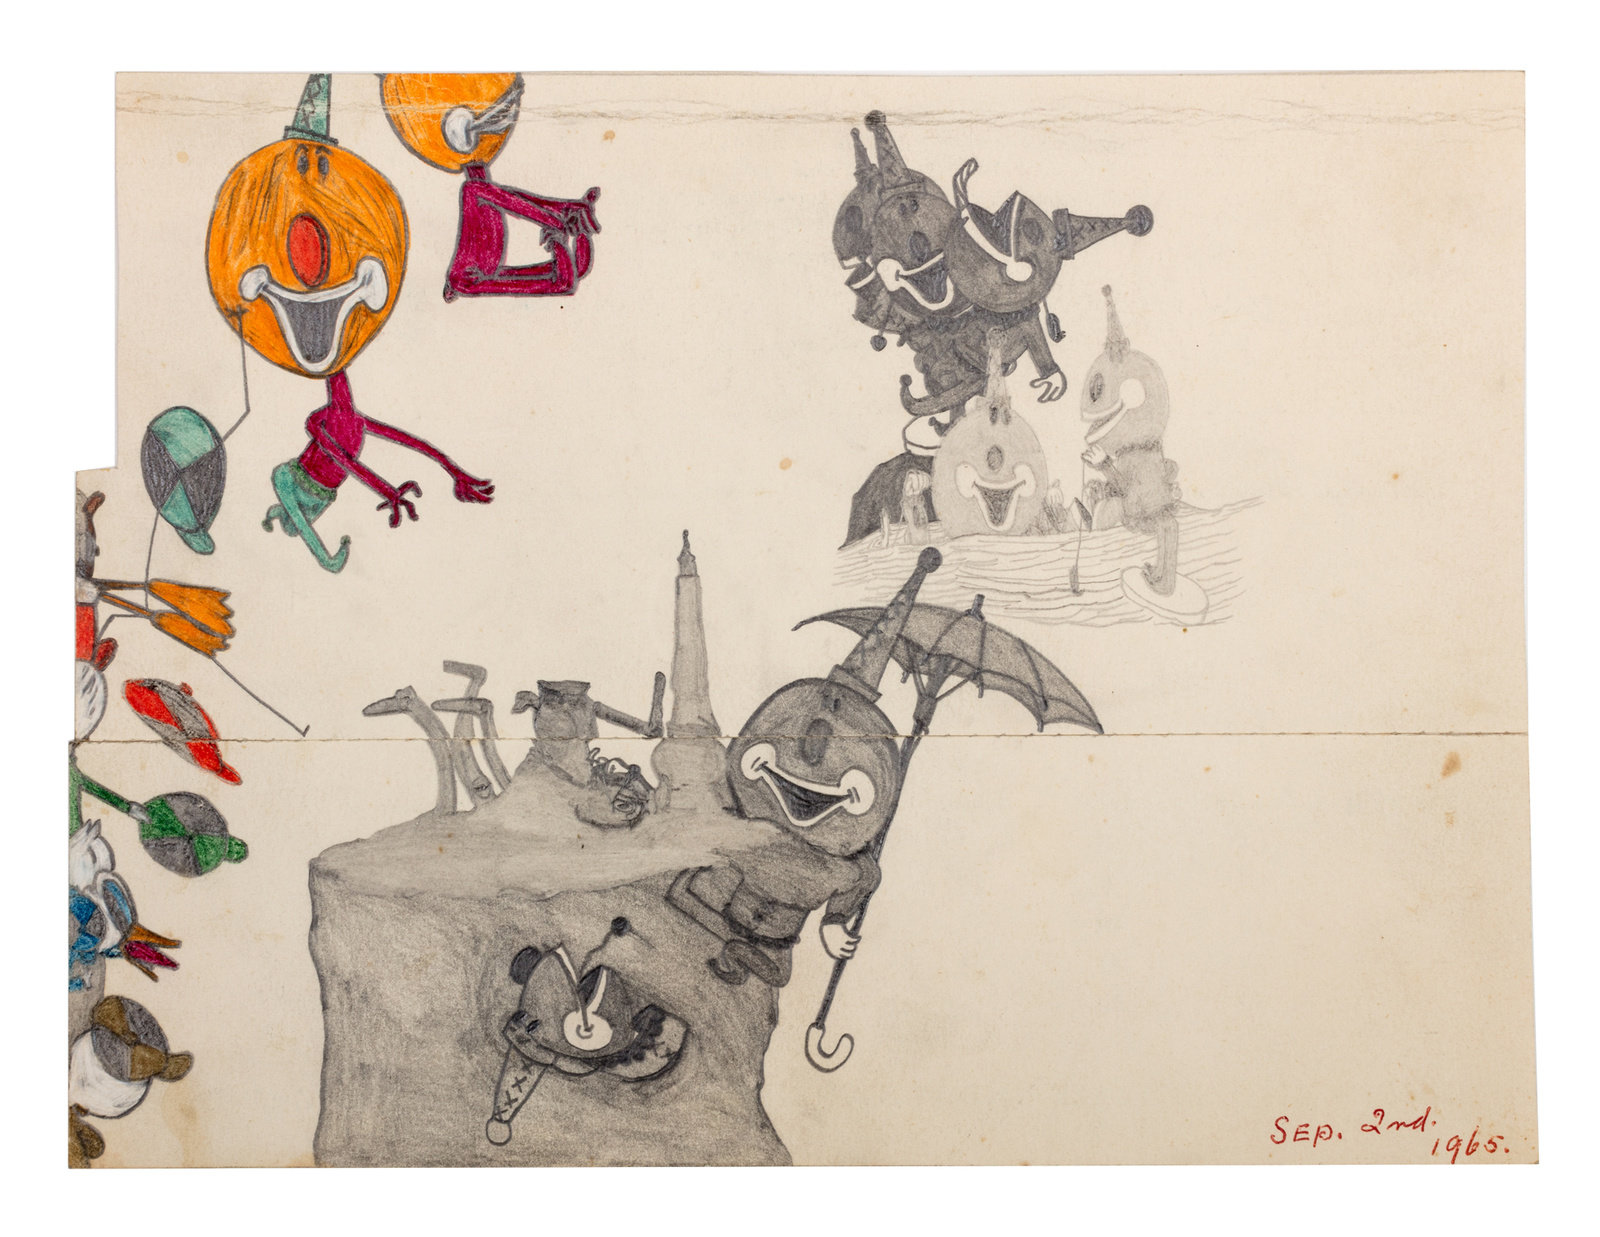 King, untitled, 2 sept 1965, coloured pencil and graphite on found paper, 8.25 x 10.75 in., 21 x 27.5 cm, 370045